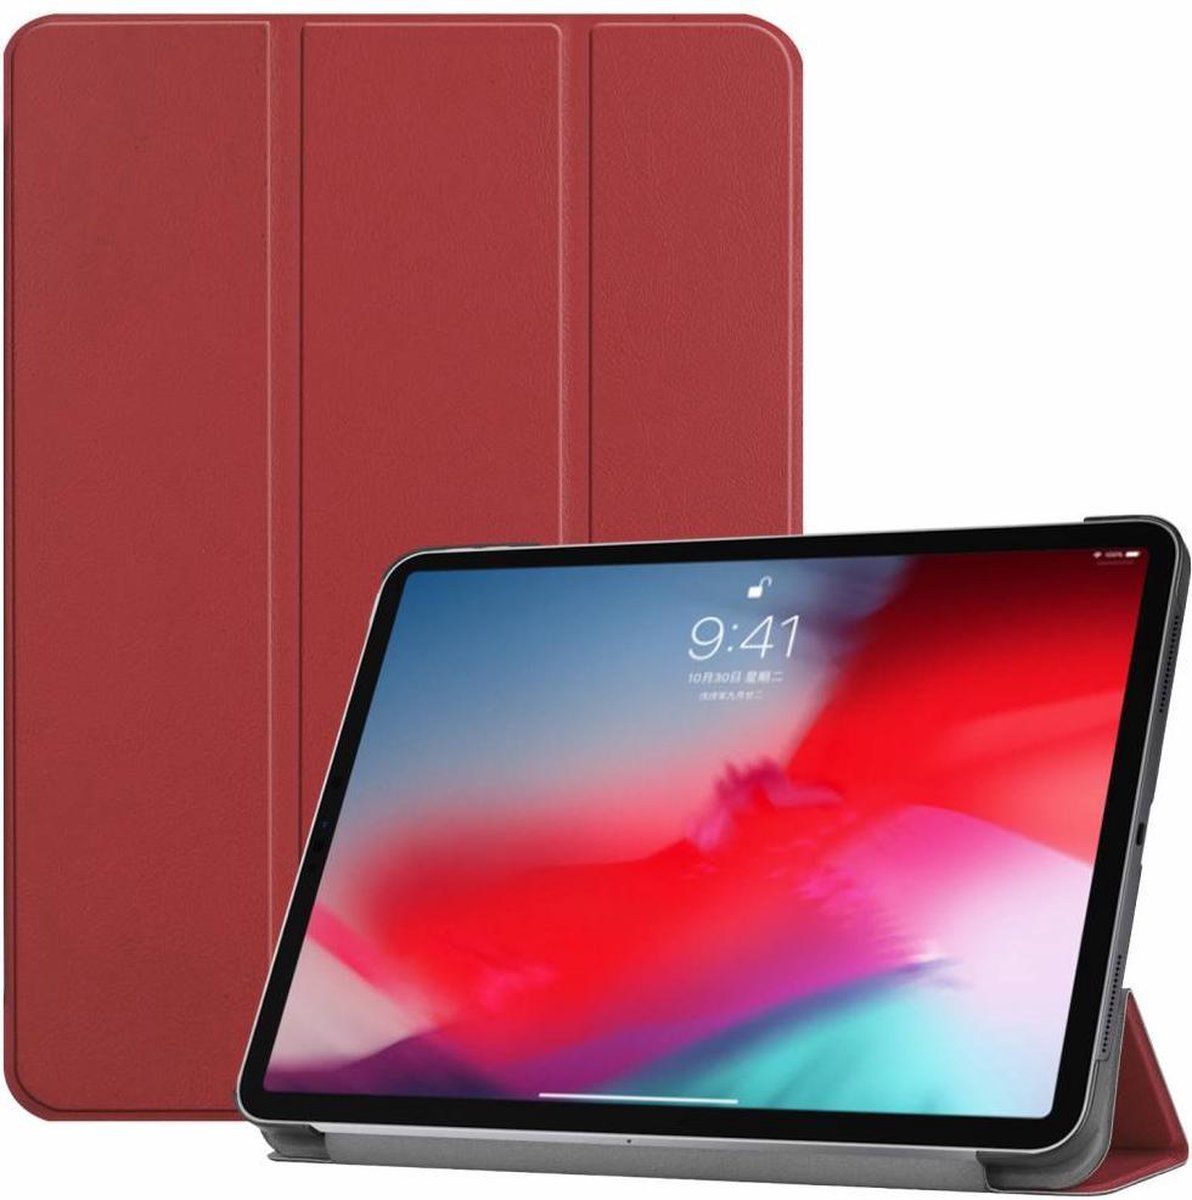 3-Vouw sleepcover hoes -iPad Pro 11 inch (2018-2019) - bordeaux rood